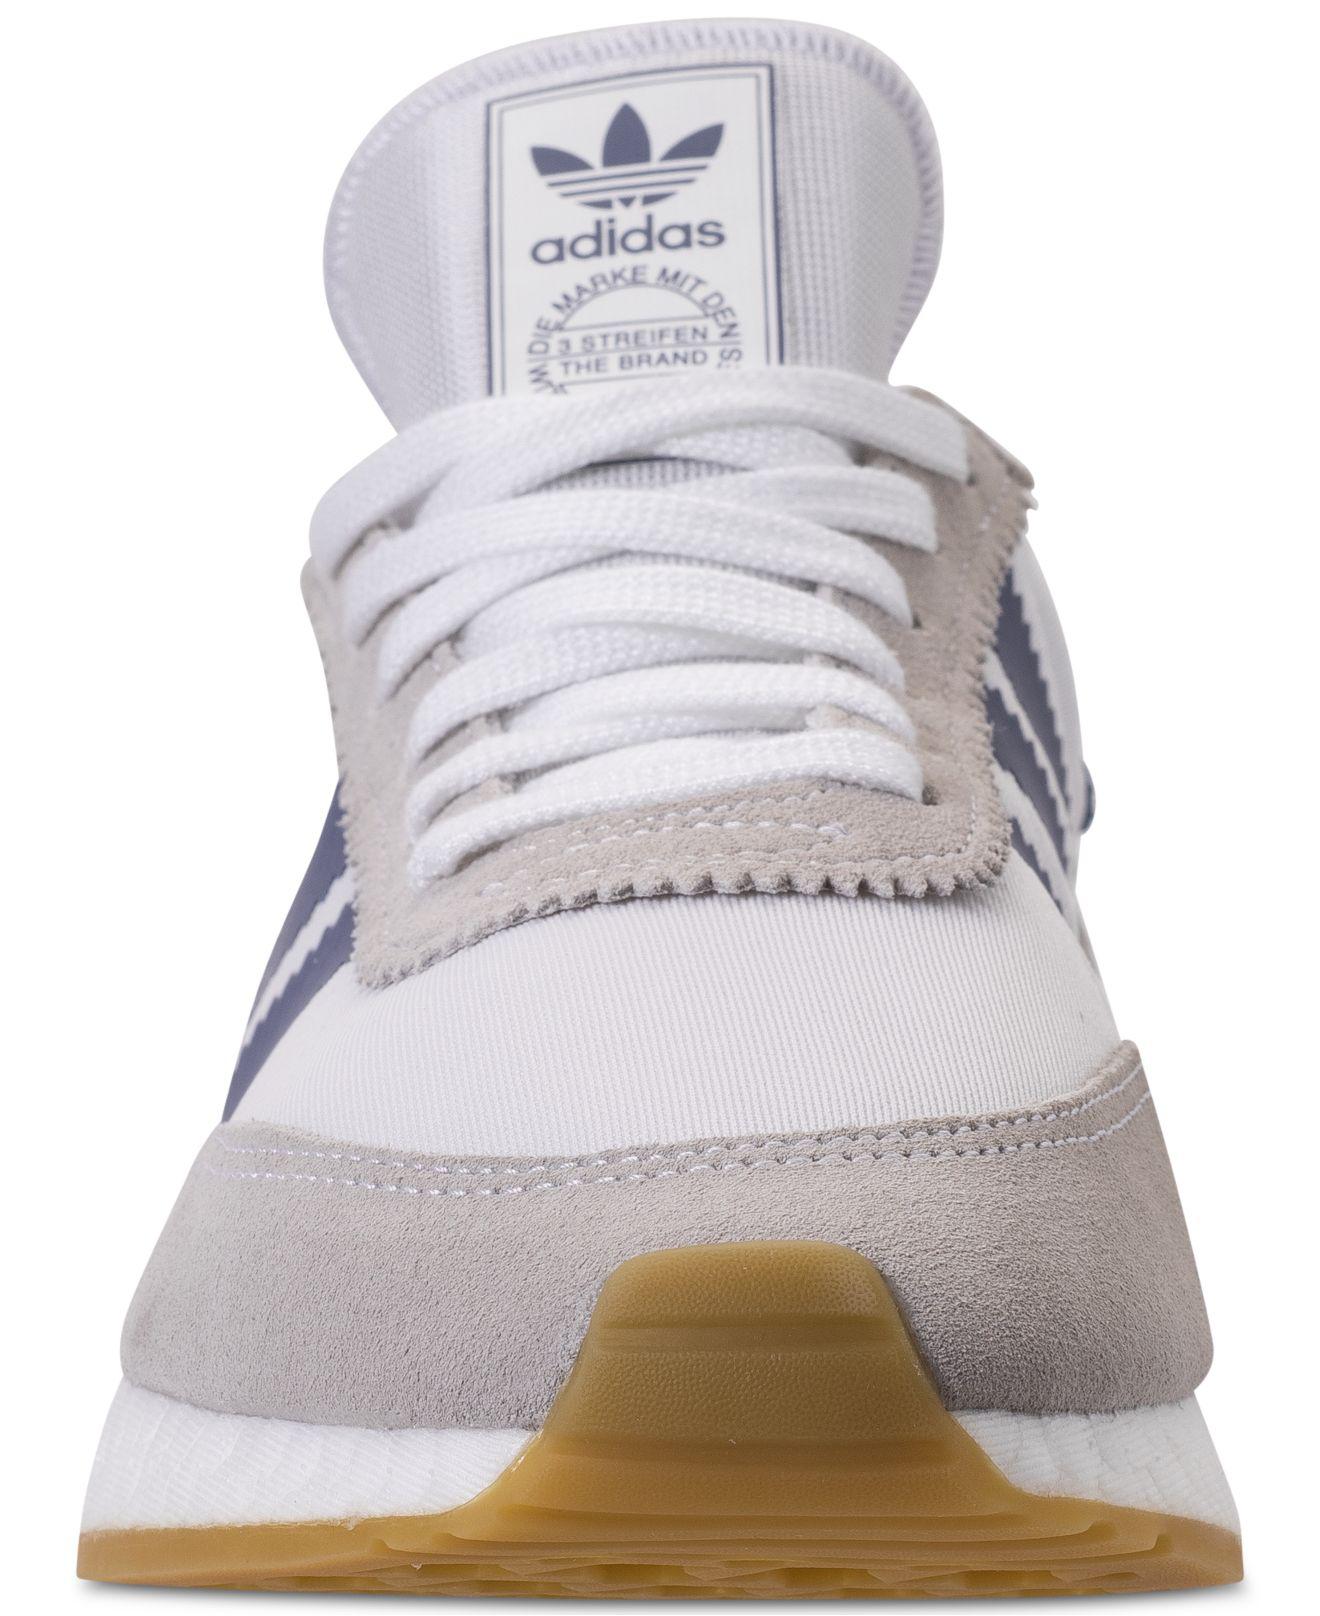 adidas Suede I-5923 Runner Casual 